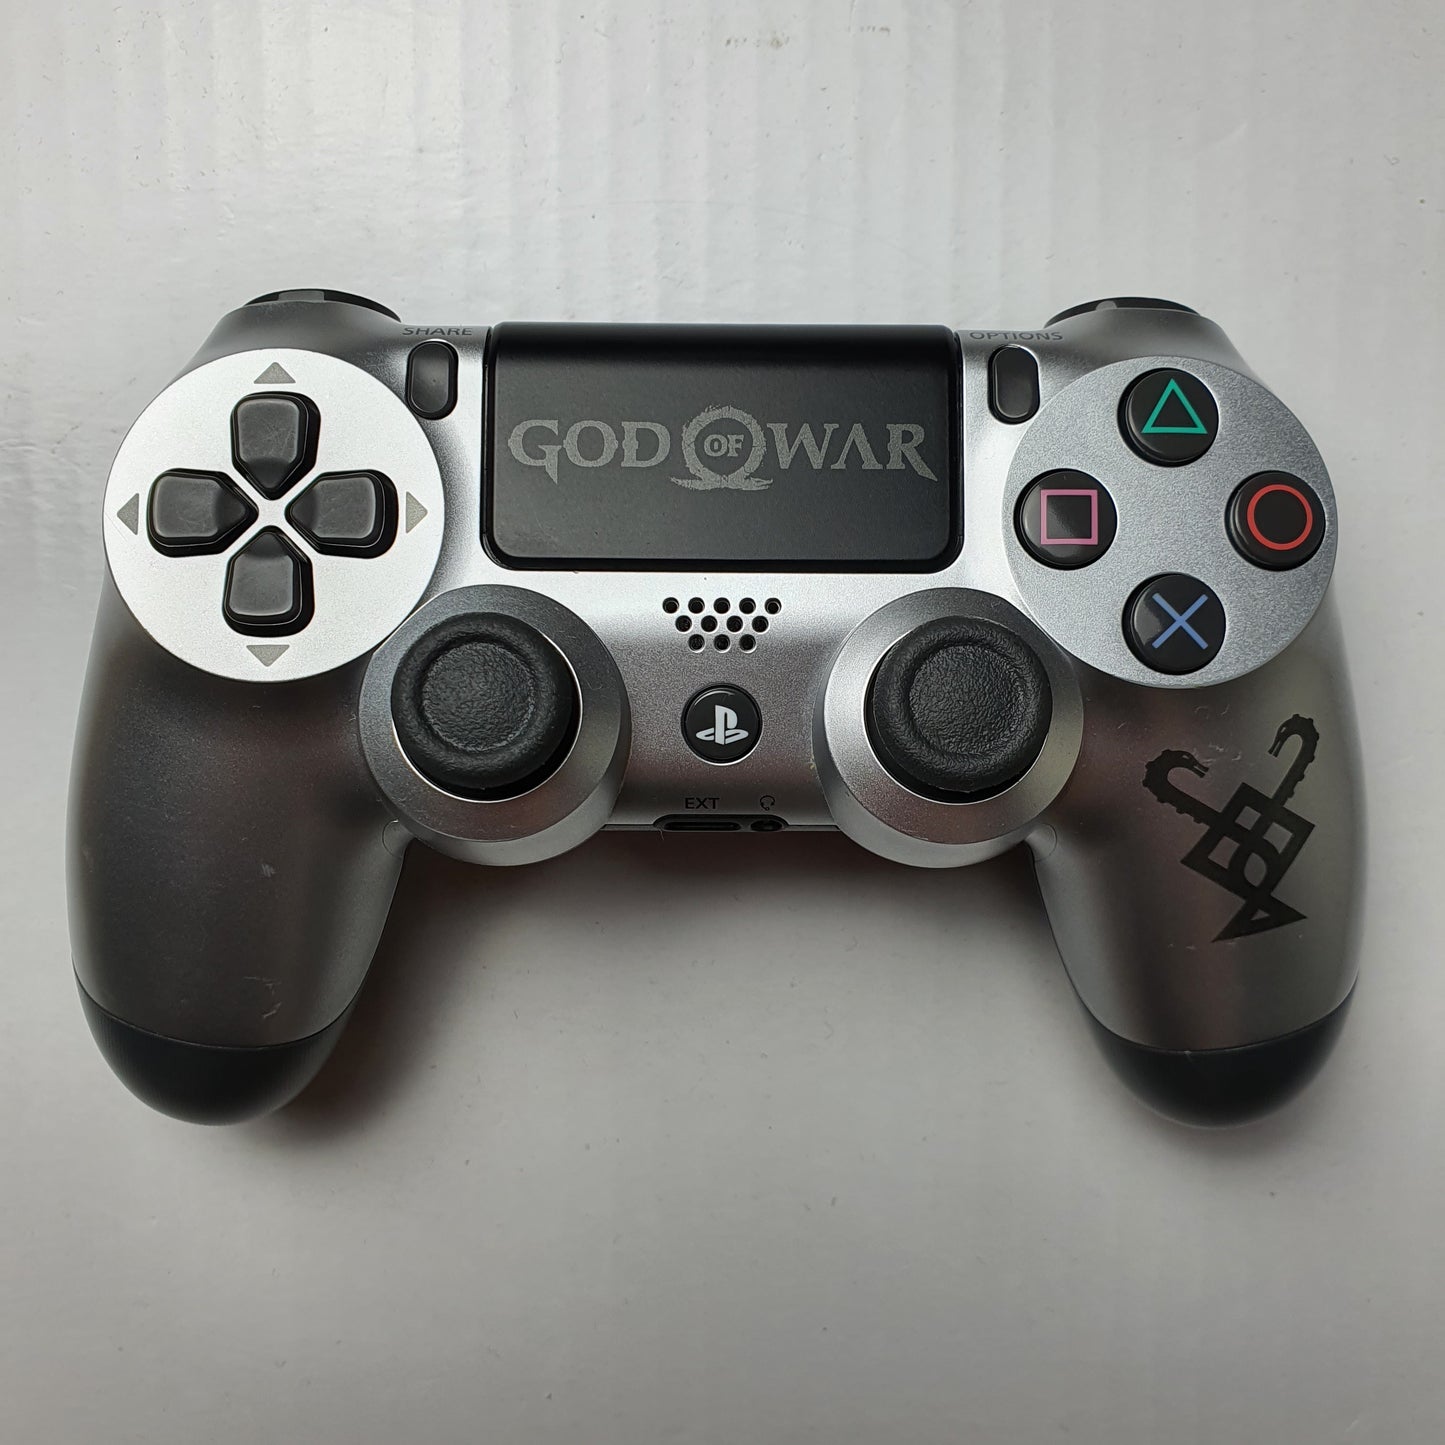 Official Sony PlayStation PS4 Limited Edition 'God of War' DualShock 4 Wireless Controller